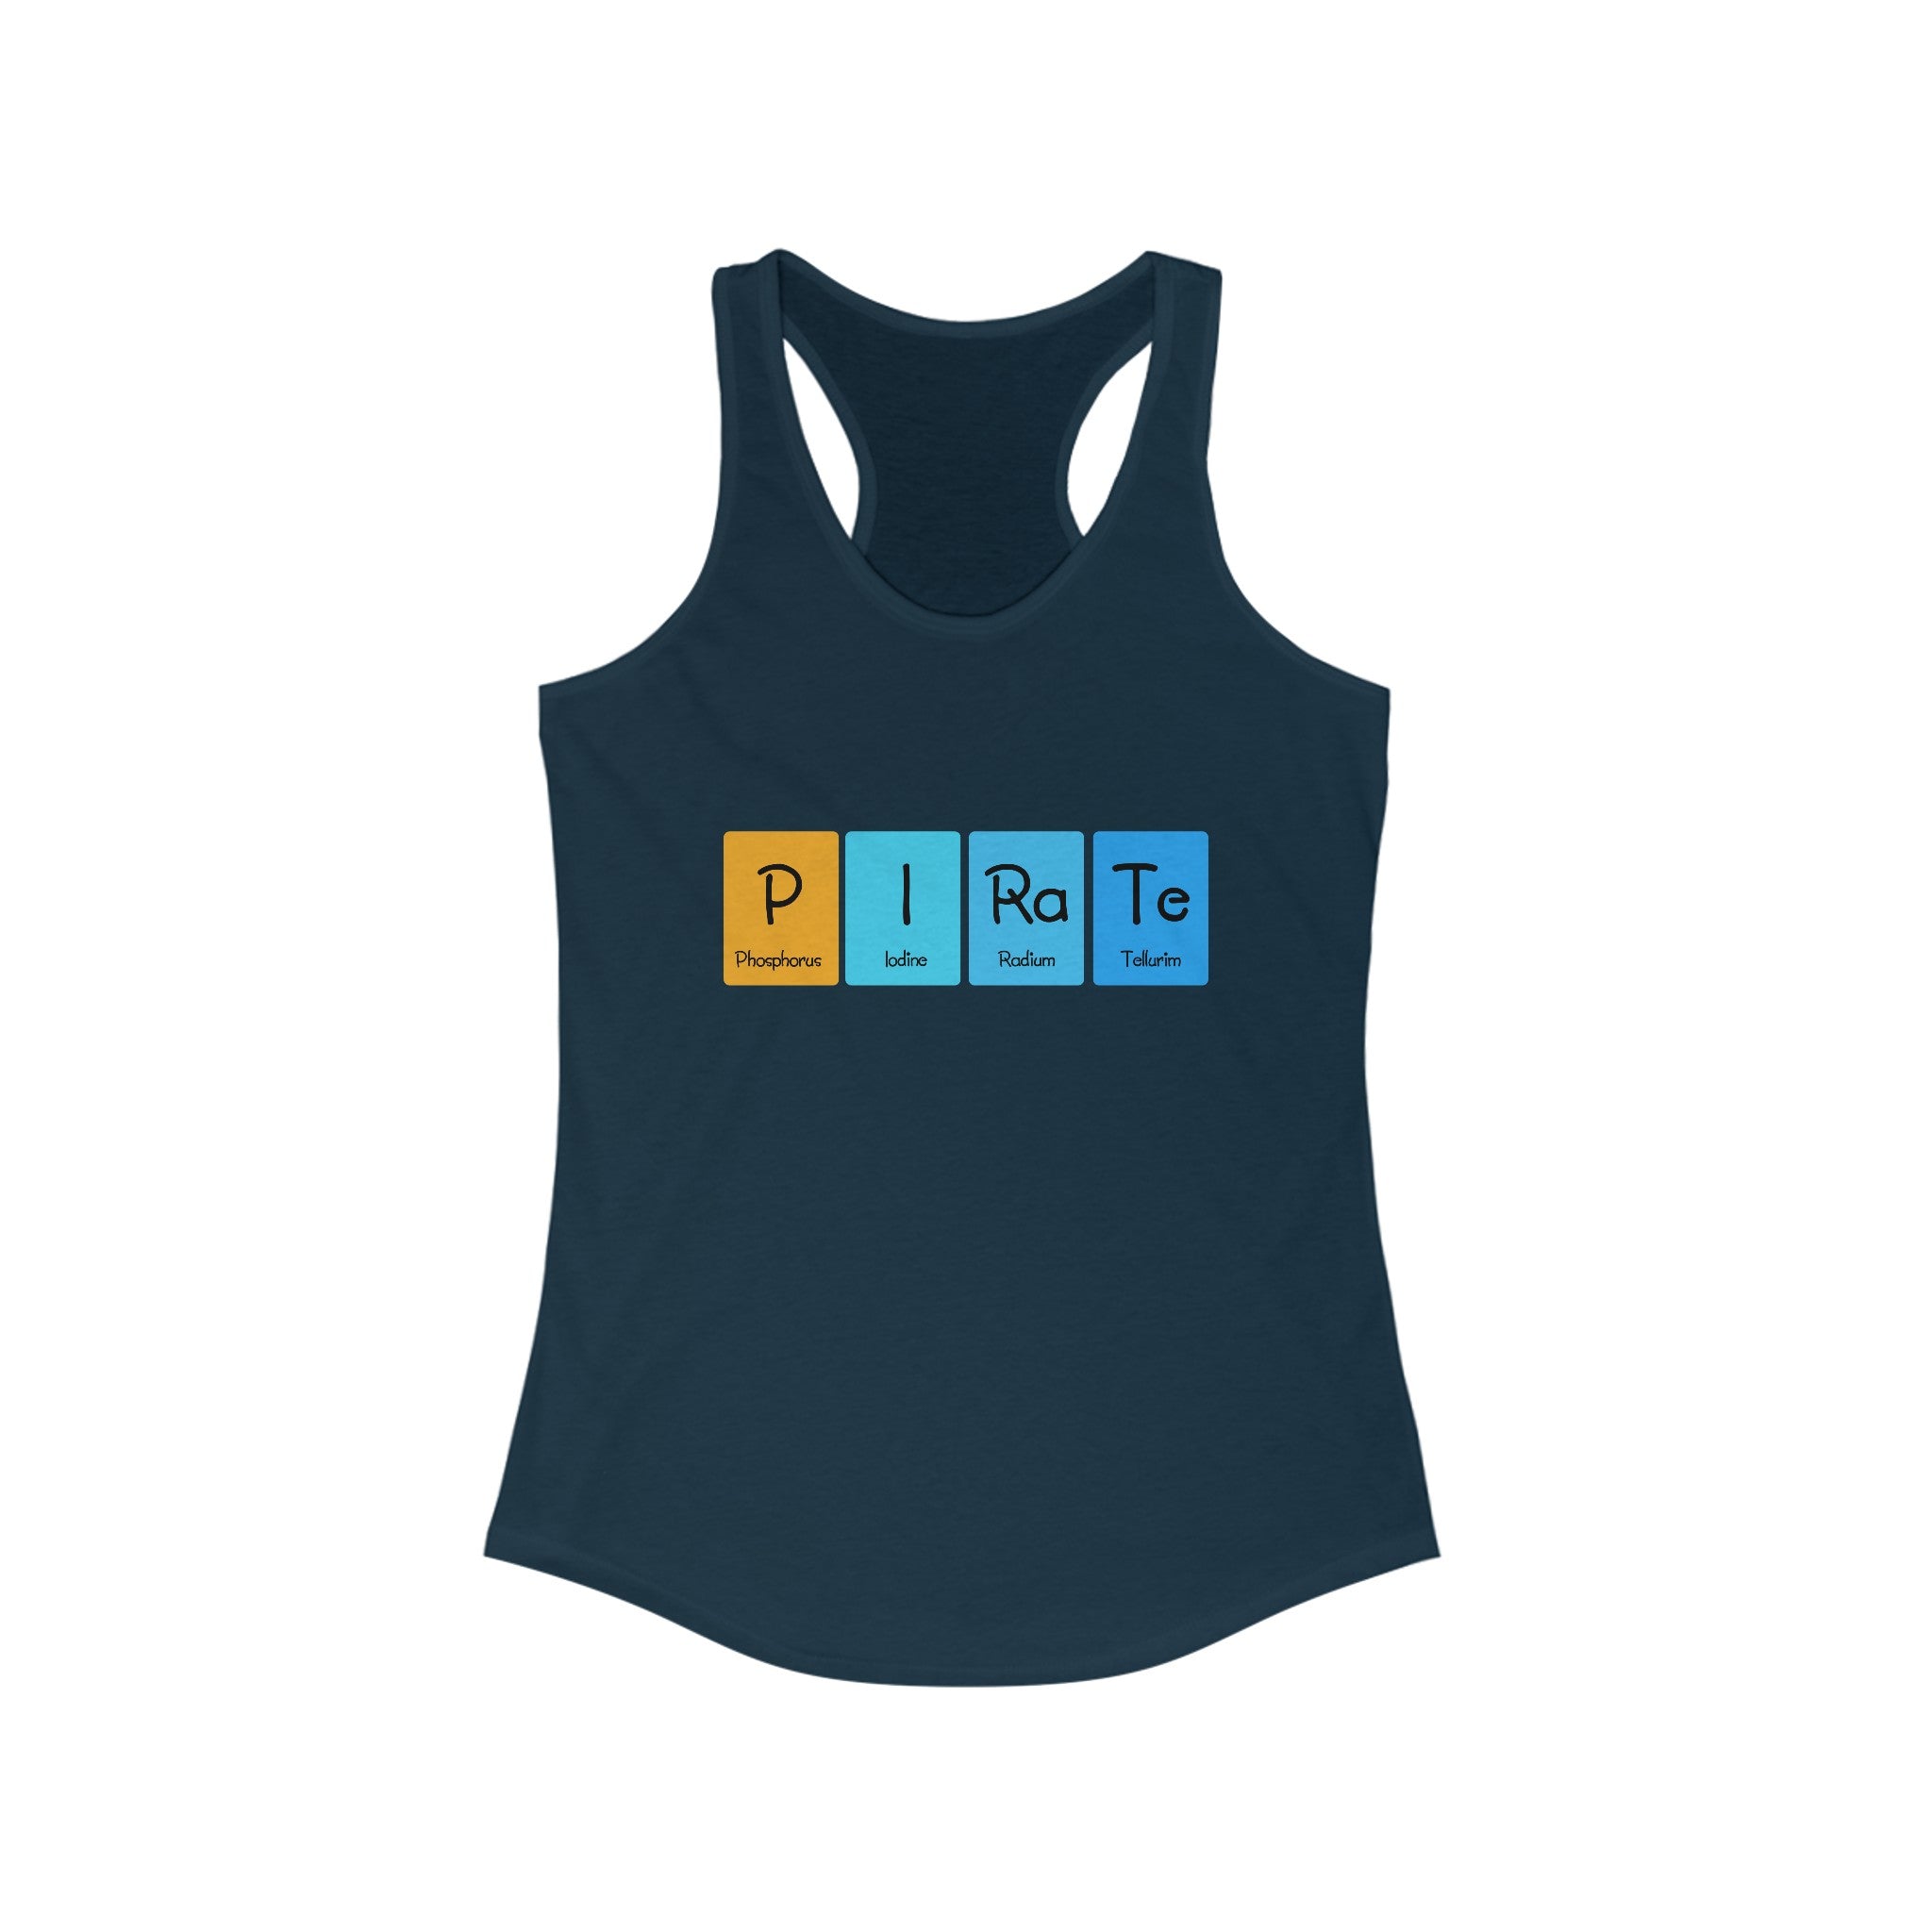 Navy blue P-I-Ra-Te - Women's Racerback Tank featuring the word "Pirate" spelled out using periodic table element symbols Phosphorus, Iodine, Radium, and Tellurium. Perfect for an active lifestyle, this lightweight top combines style and science seamlessly.